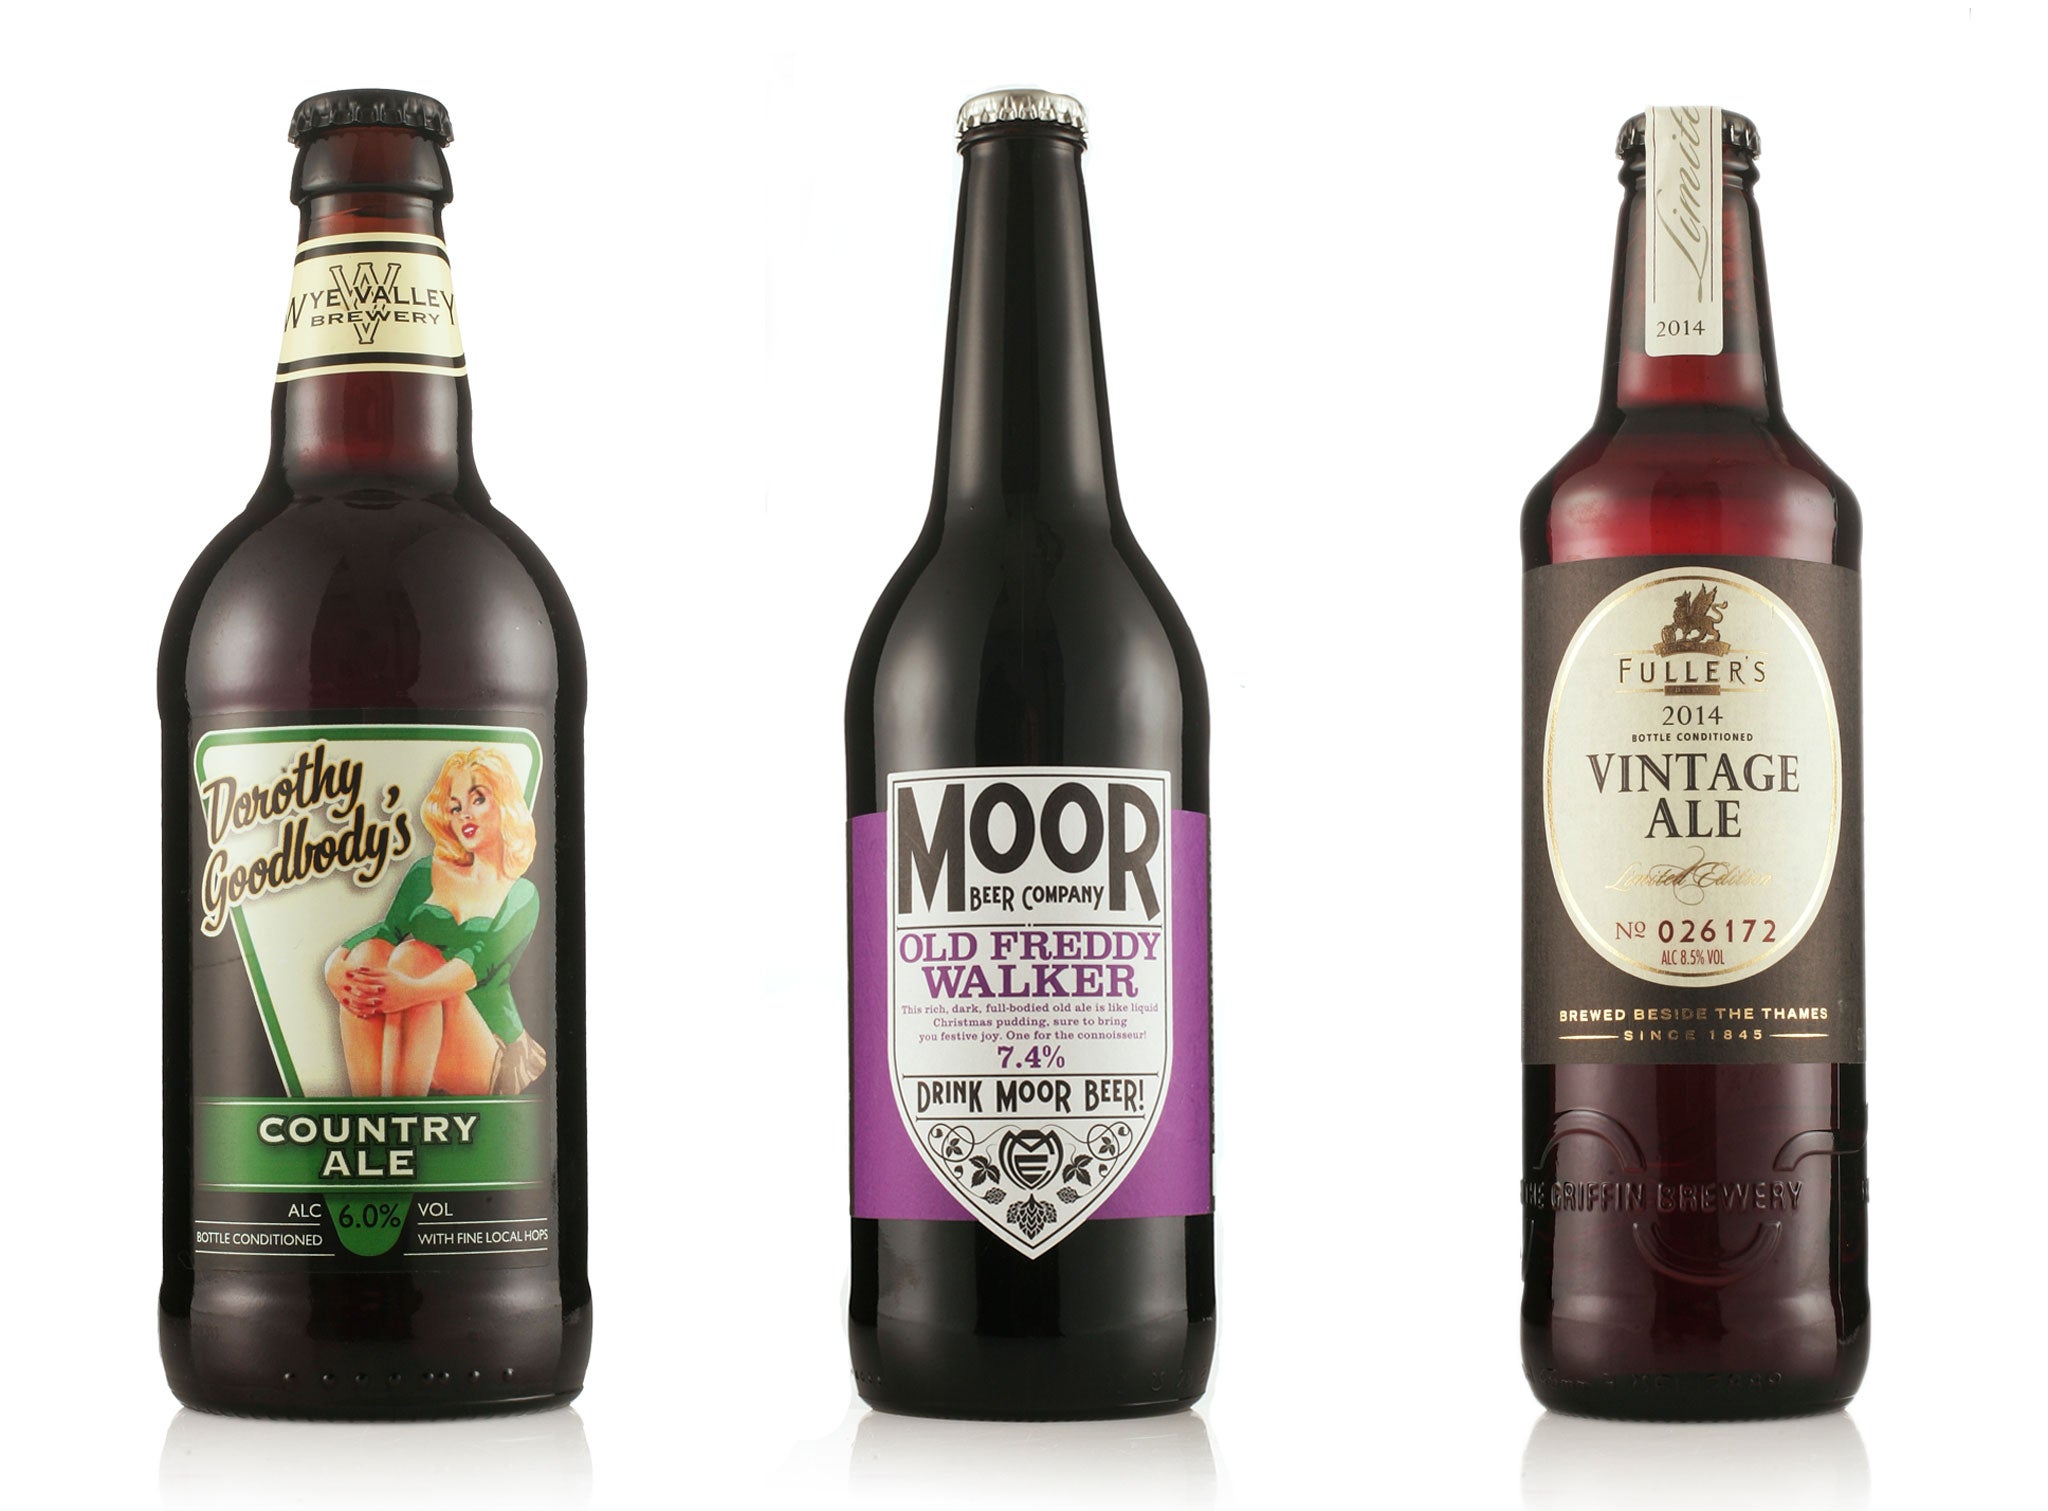 Three to try: Sip Wye Valley Dorothy Goodbody Country Ale; Moor Old Freddy Walker; Fuller's Vintage 2014